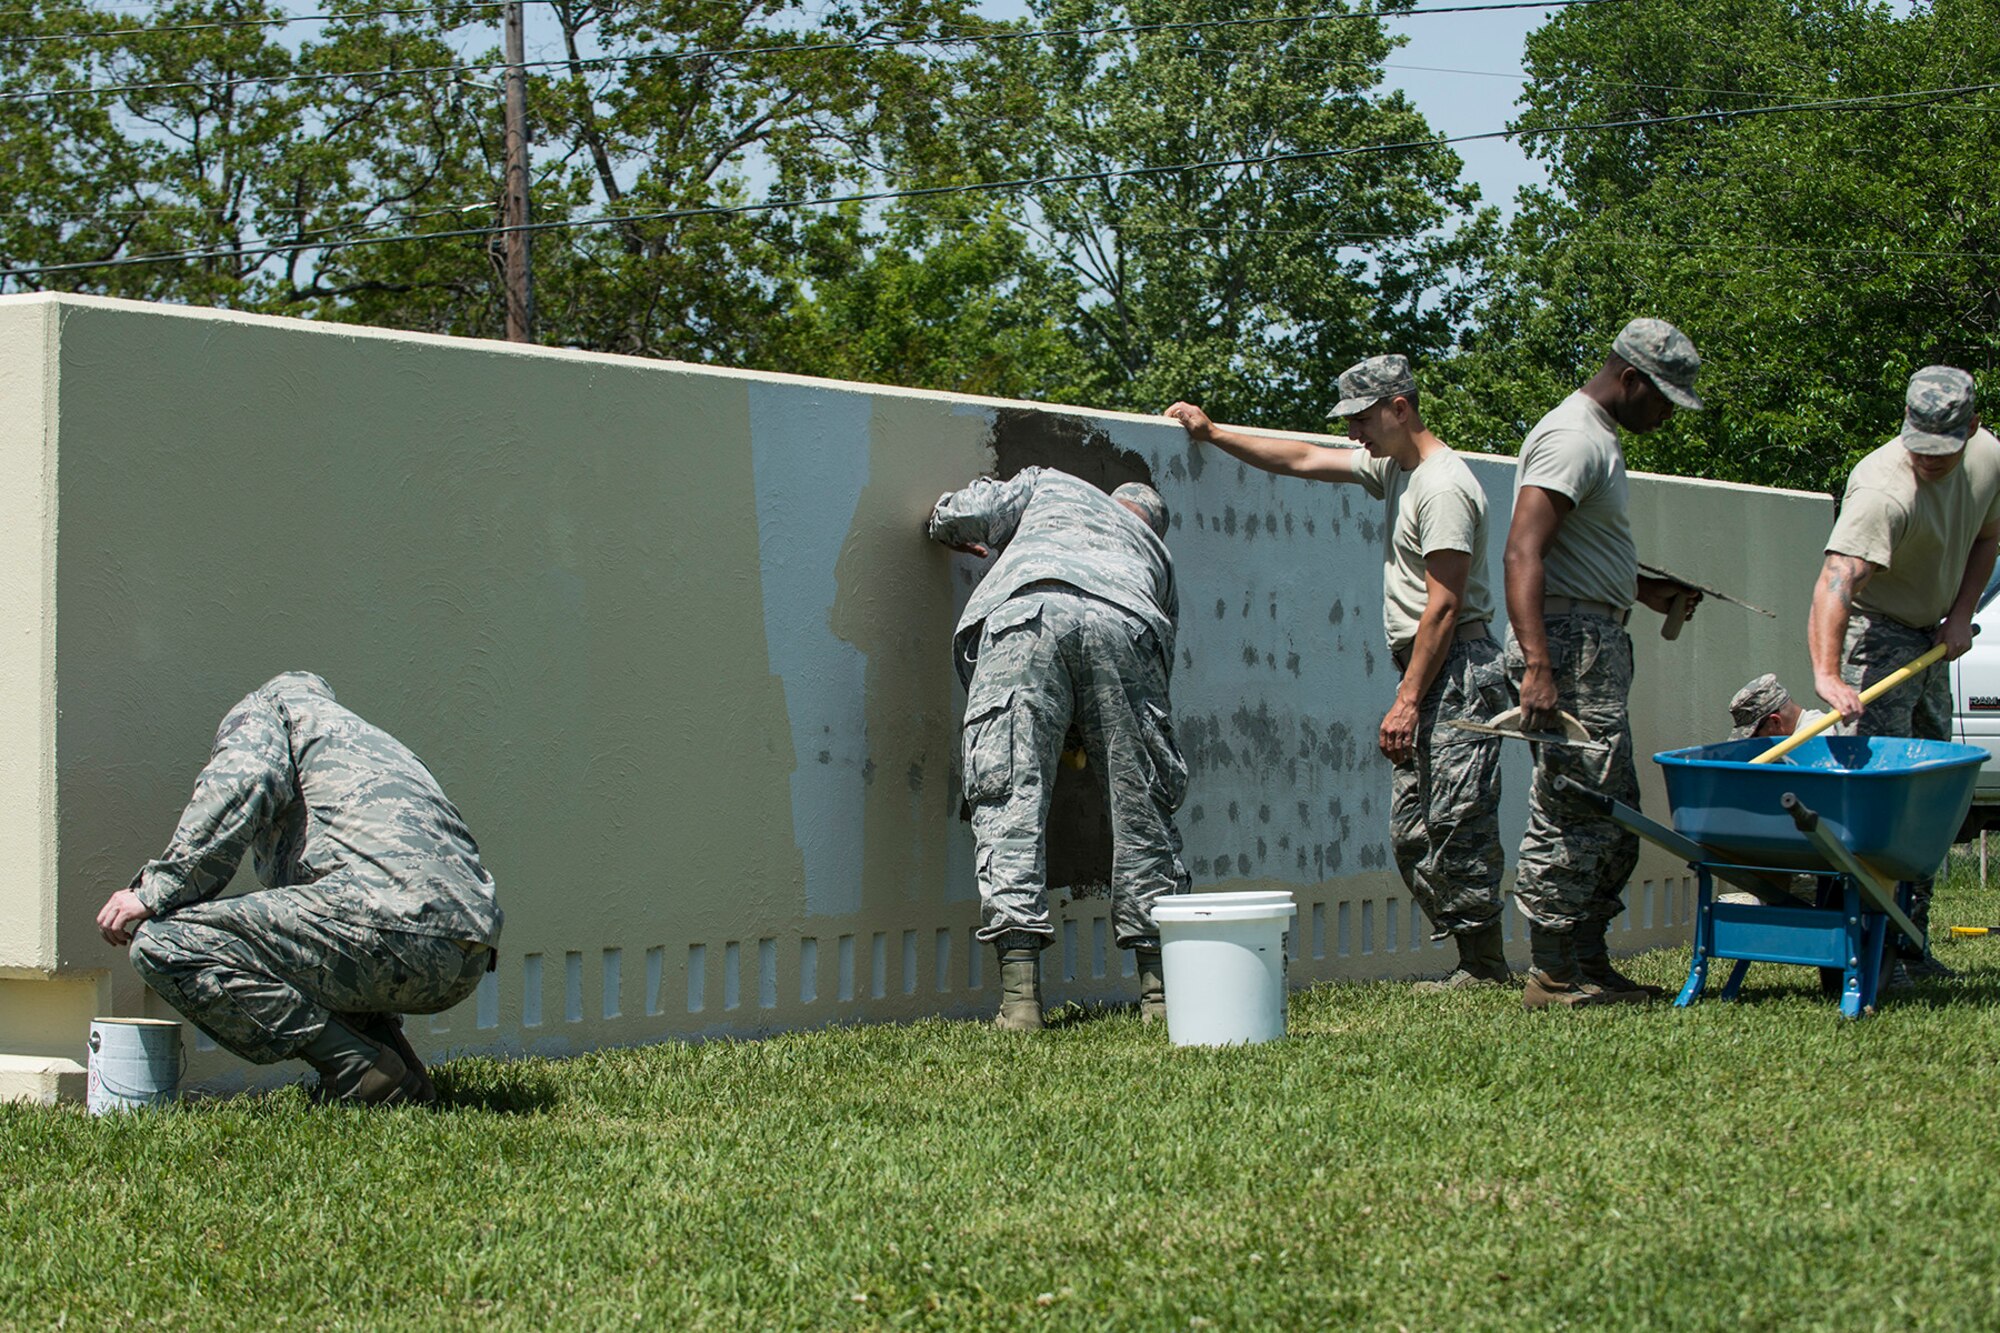 Members of the 307th Civil Engineer Squadron work to complete a makeover of the 307th Bomb Wing headquarters sign on April 11, 2018, Barksdale Air Force Base, La.